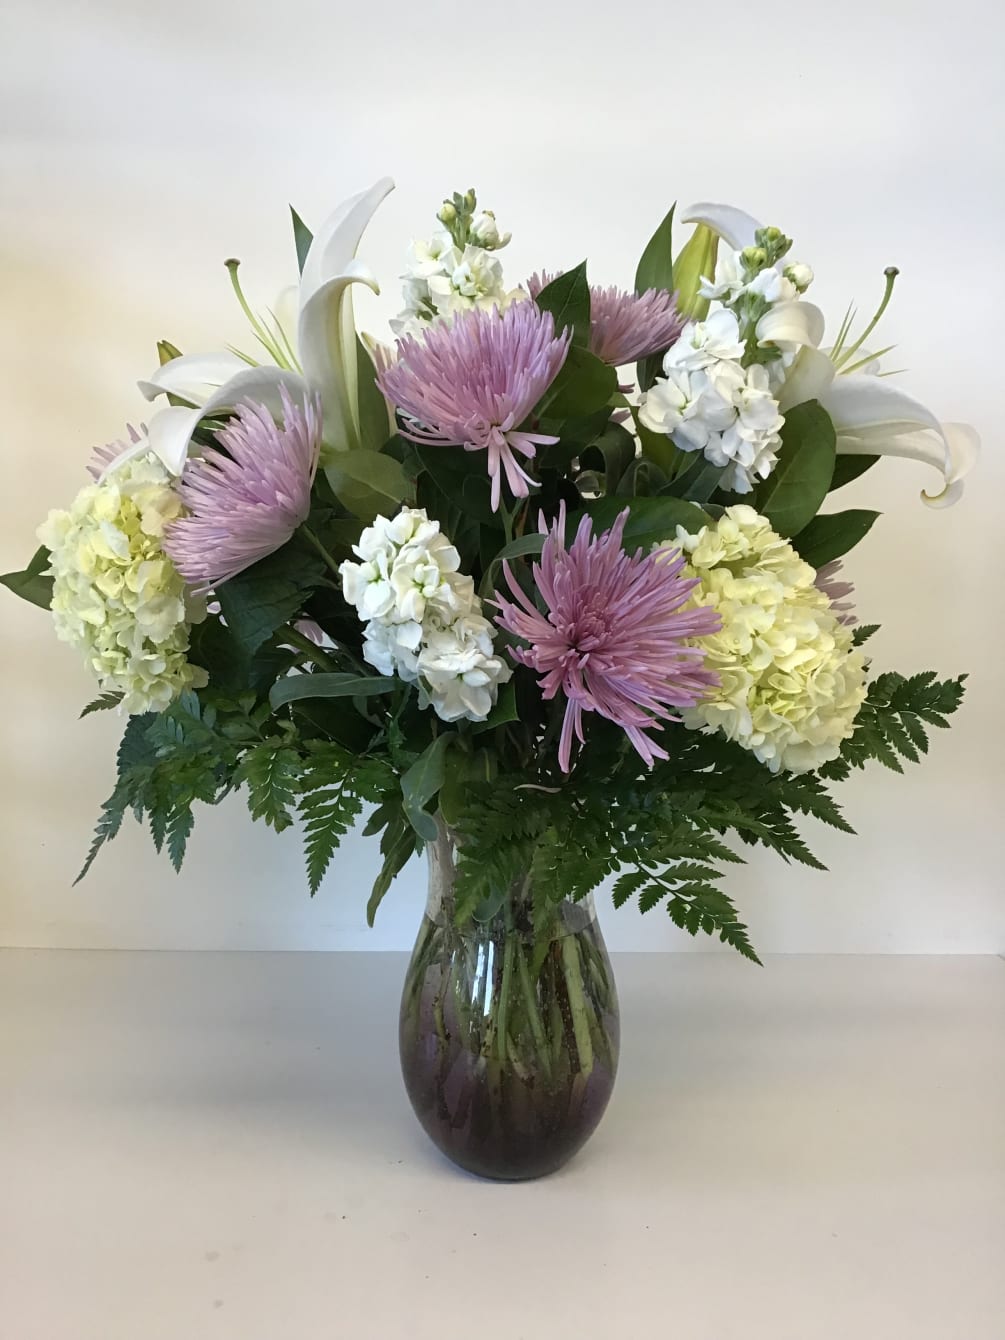 In this arrangement white stargazer lilies, Hydrangea, Stock and Fuji moms have